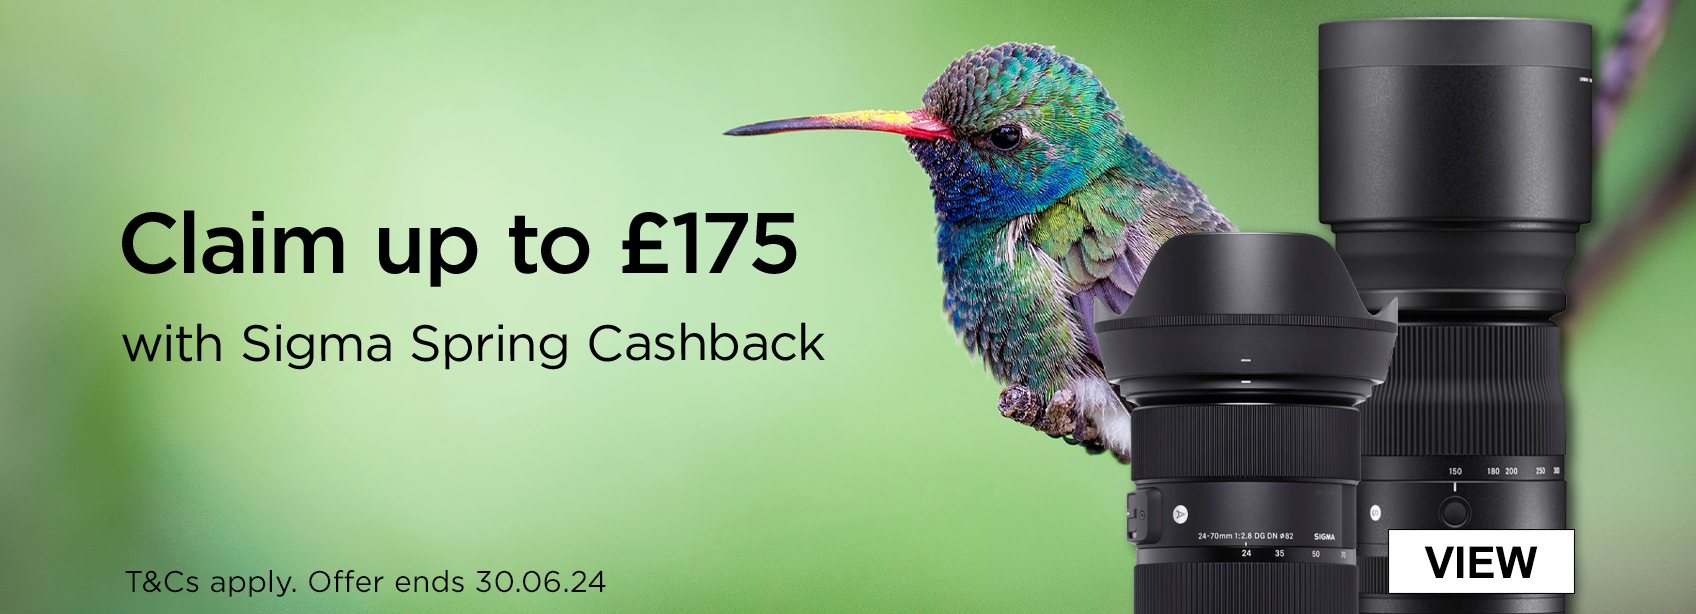 Claim up to £175 with Sigma Spring Cashback. T&Cs apply. Offer ends 30.06.24